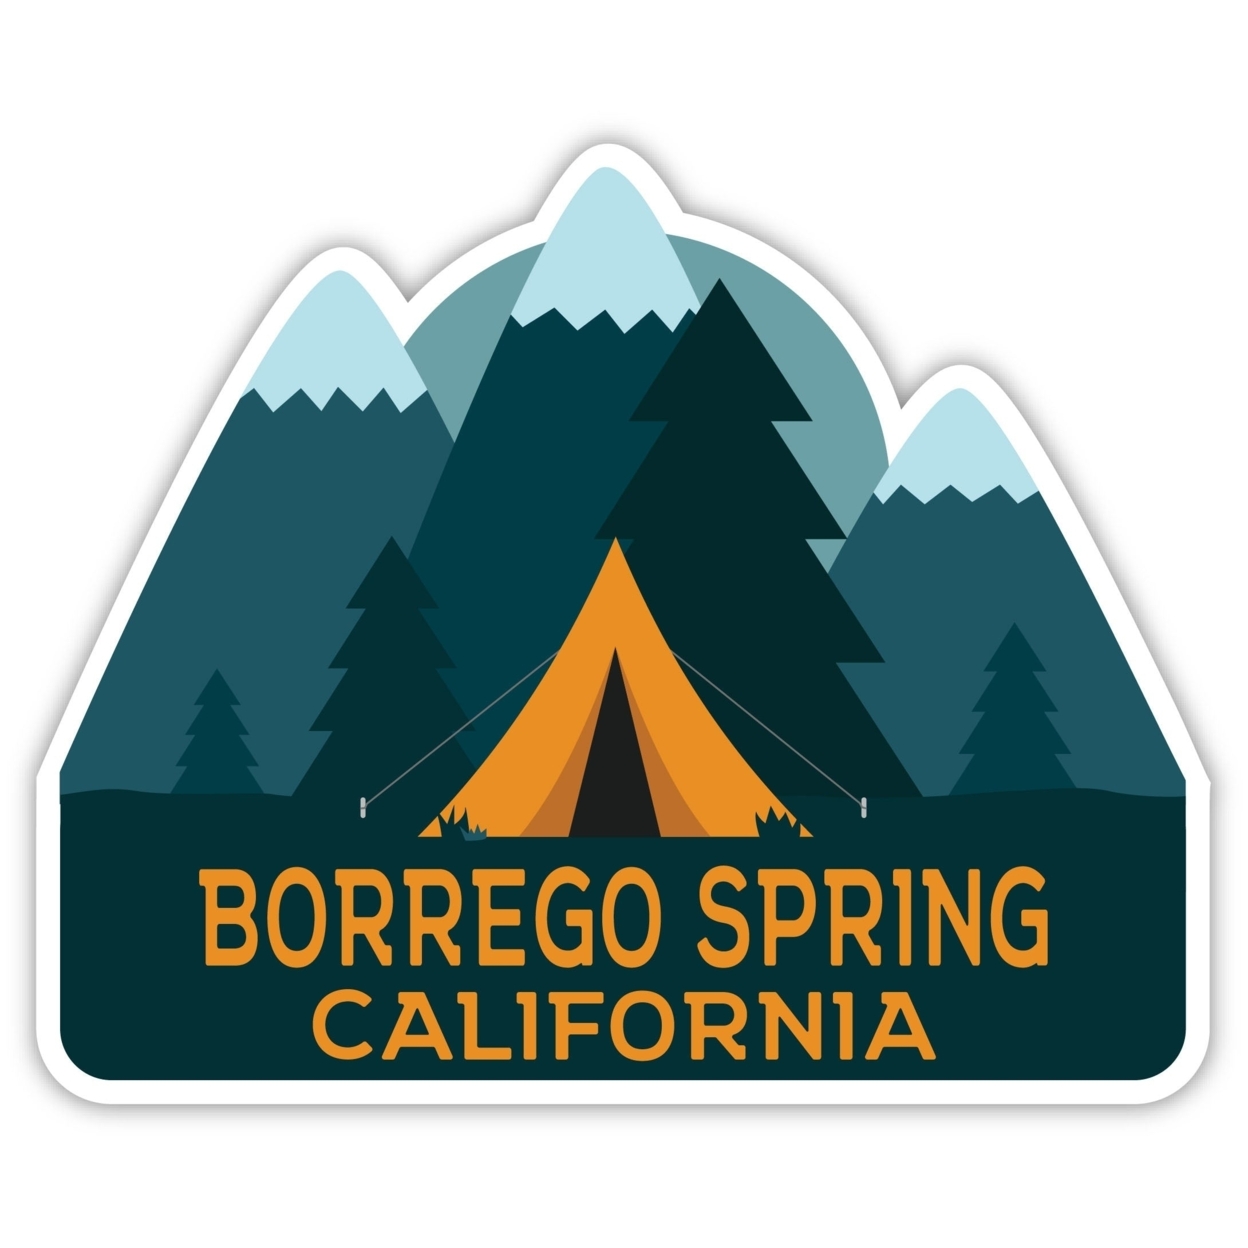 Borrego Spring California Souvenir Decorative Stickers (Choose Theme And Size) - 4-Pack, 8-Inch, Tent